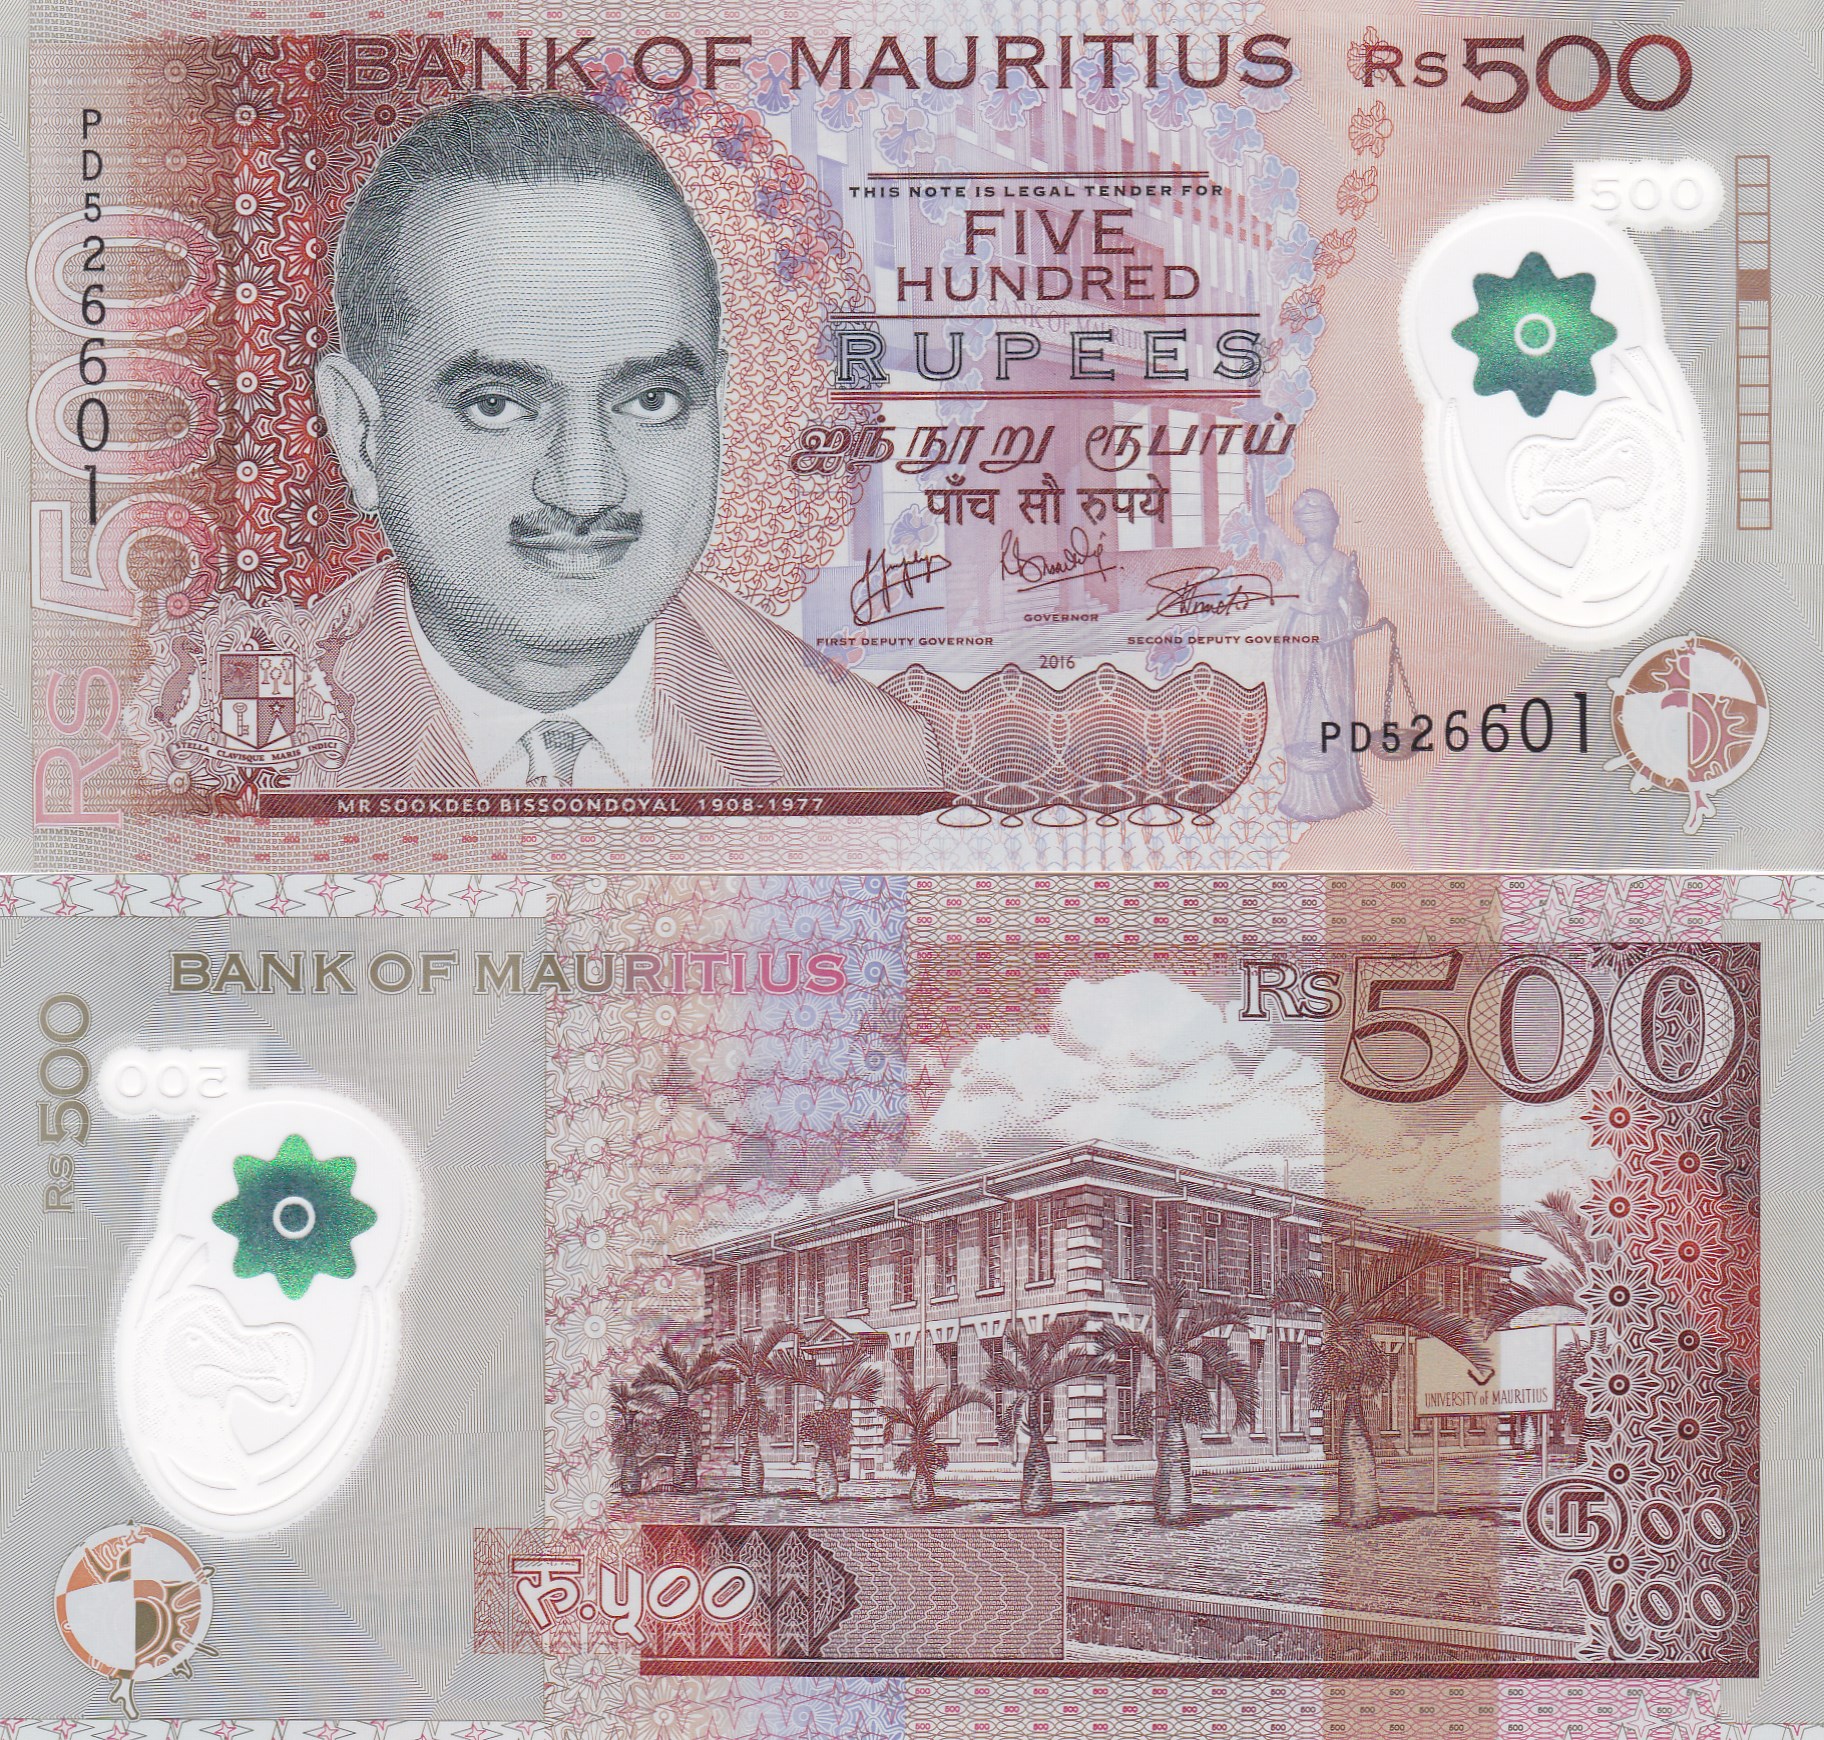 SCWPM P64a TBB B430 25 Rupees Mauritius Banknote Uncirculated UNC (2013 ...